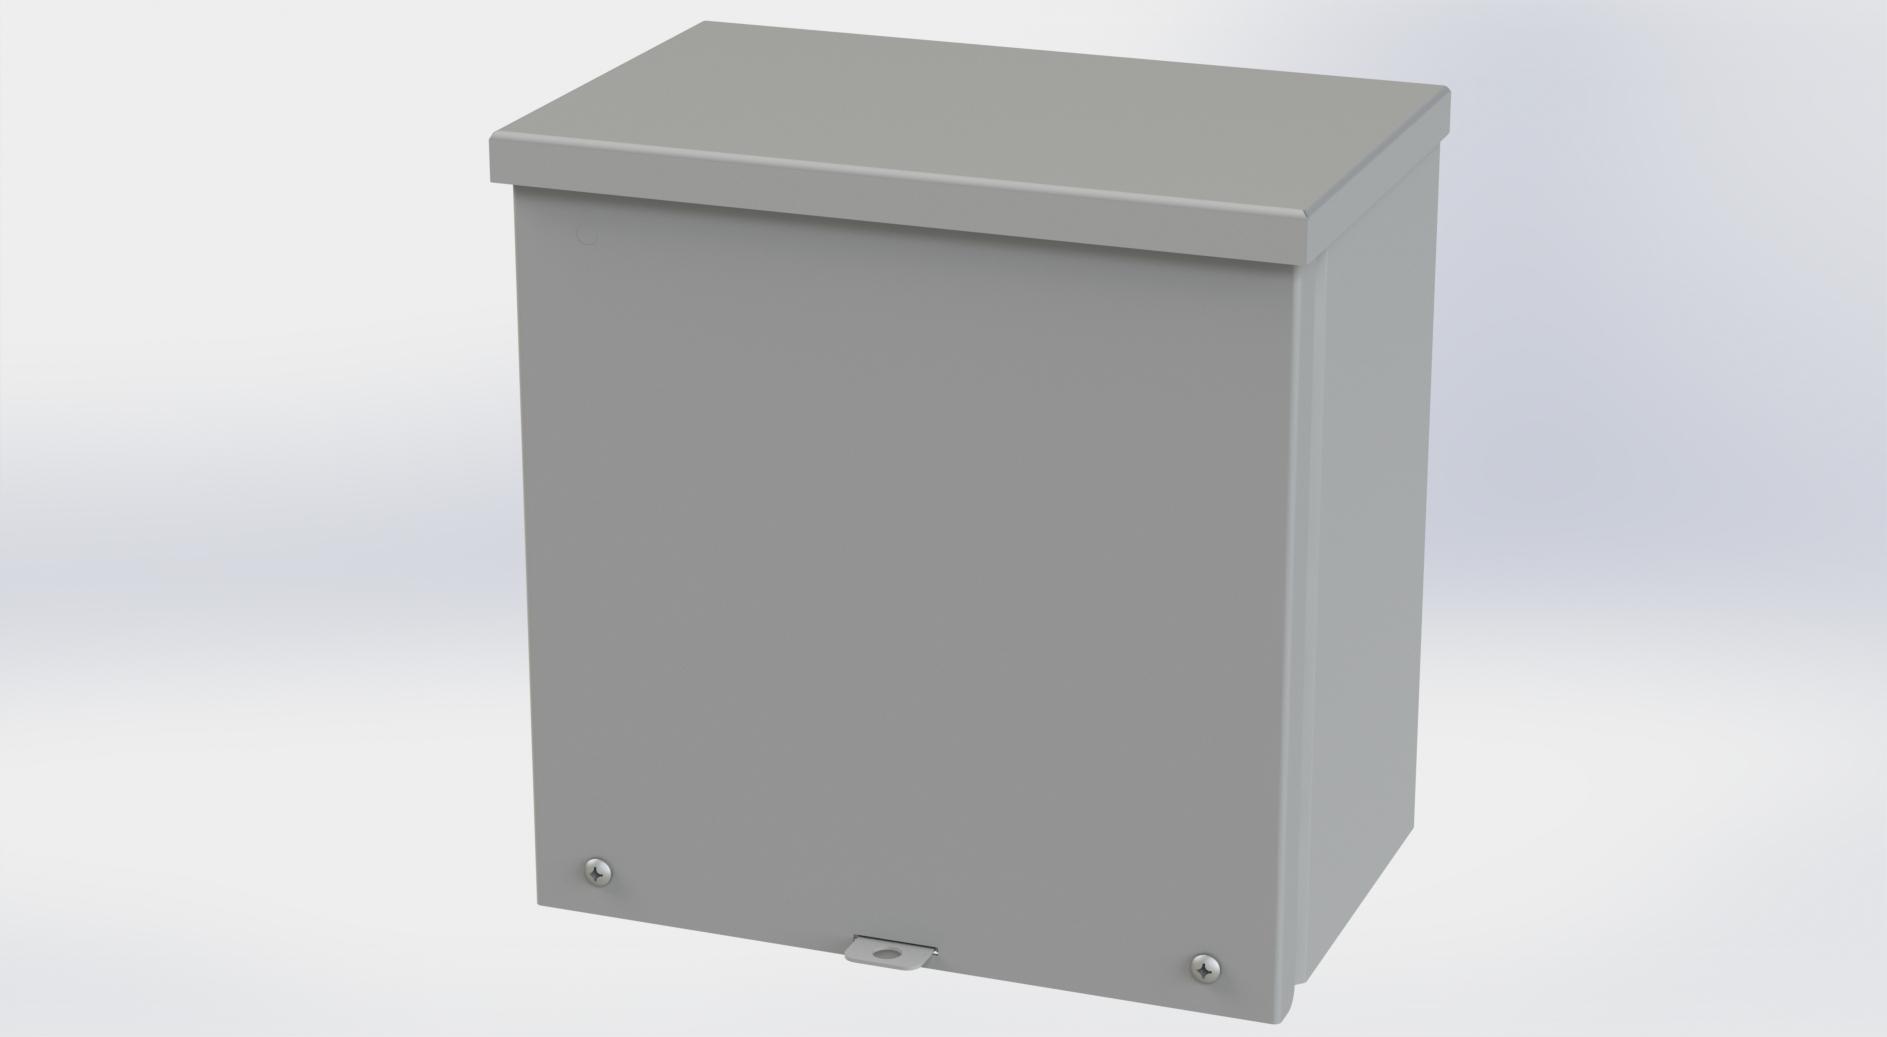 Saginaw Control SCE-10R106 Type-3R Screw Cover Enclosure, Height:10.00", Width:10.00", Depth:6.00", ANSI-61 gray powder coating inside and out.